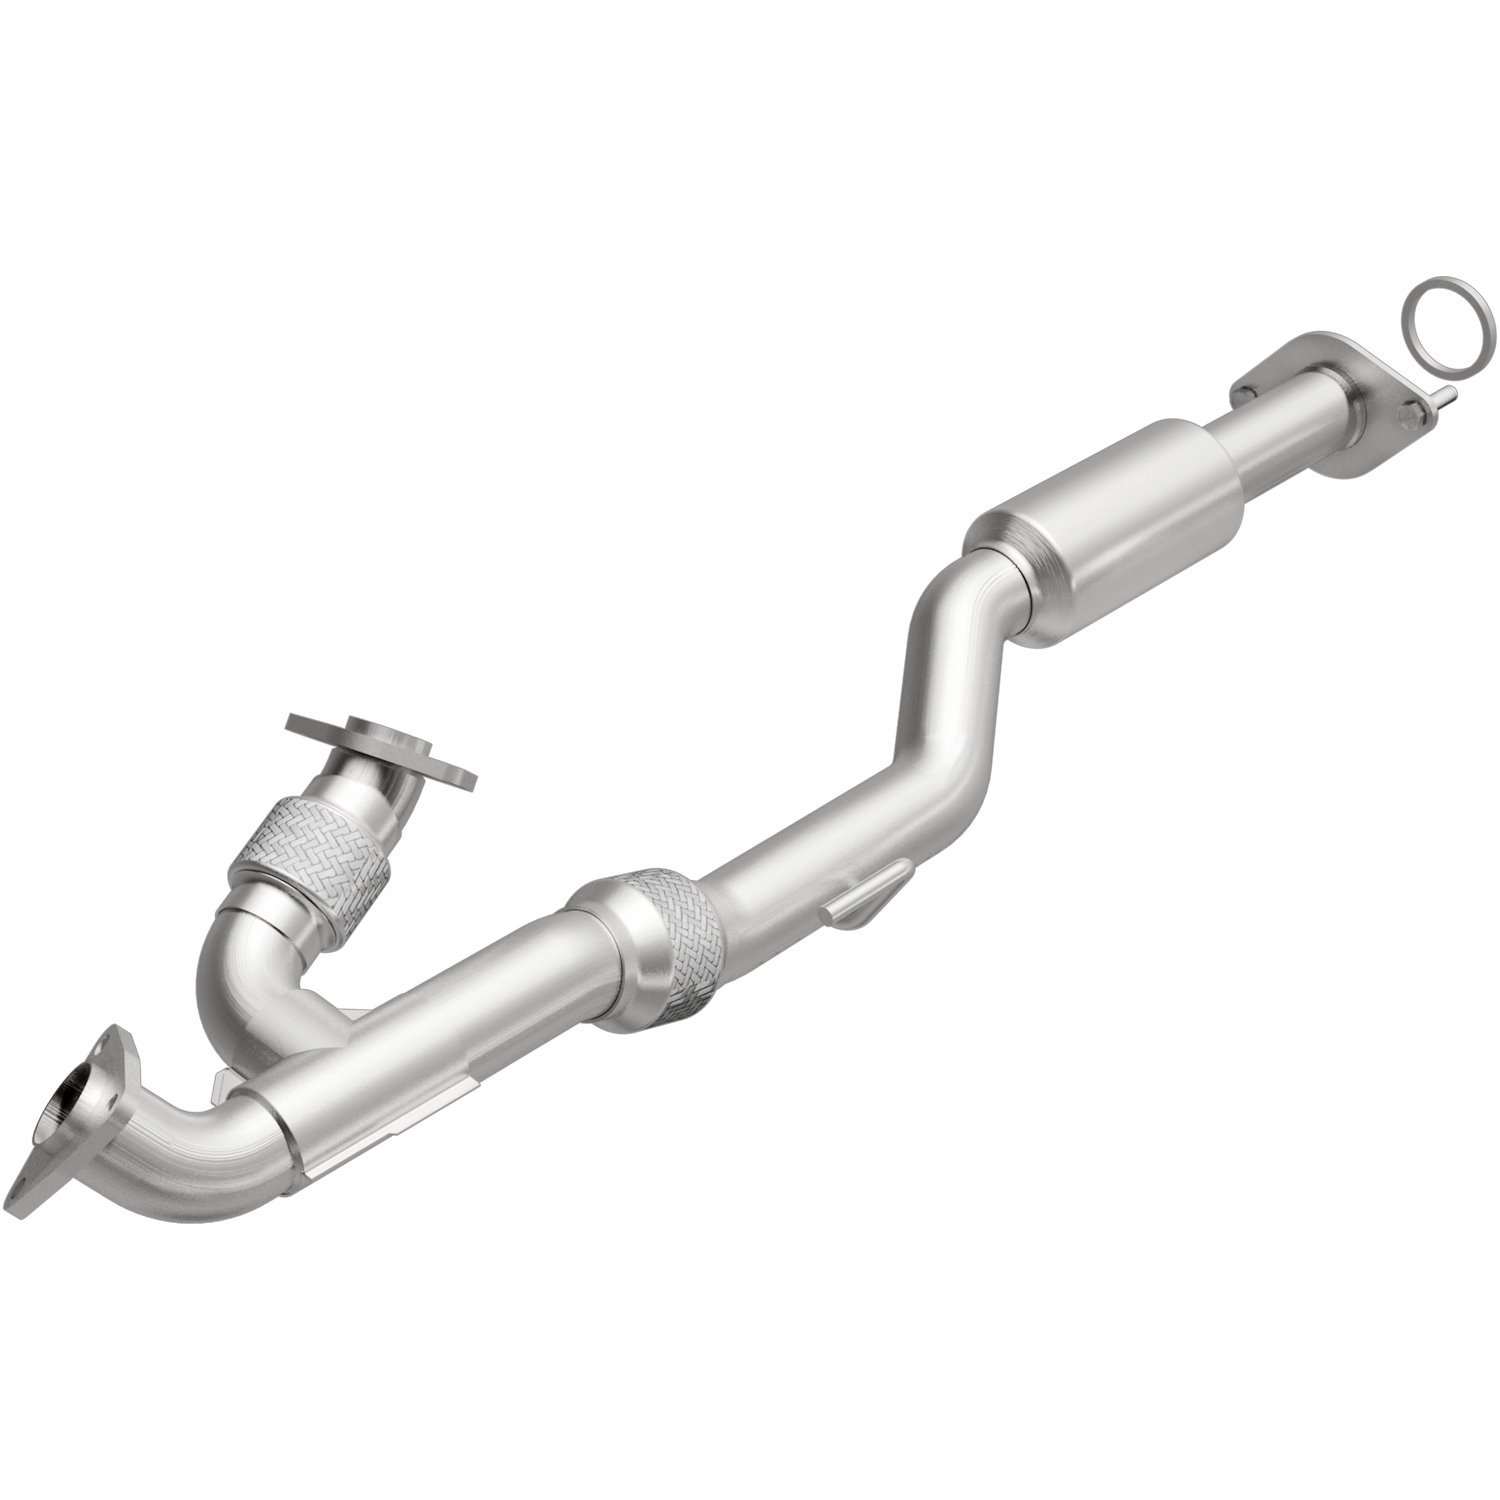 OEM Grade Federal / EPA Compliant Direct-Fit Catalytic Converter 52699